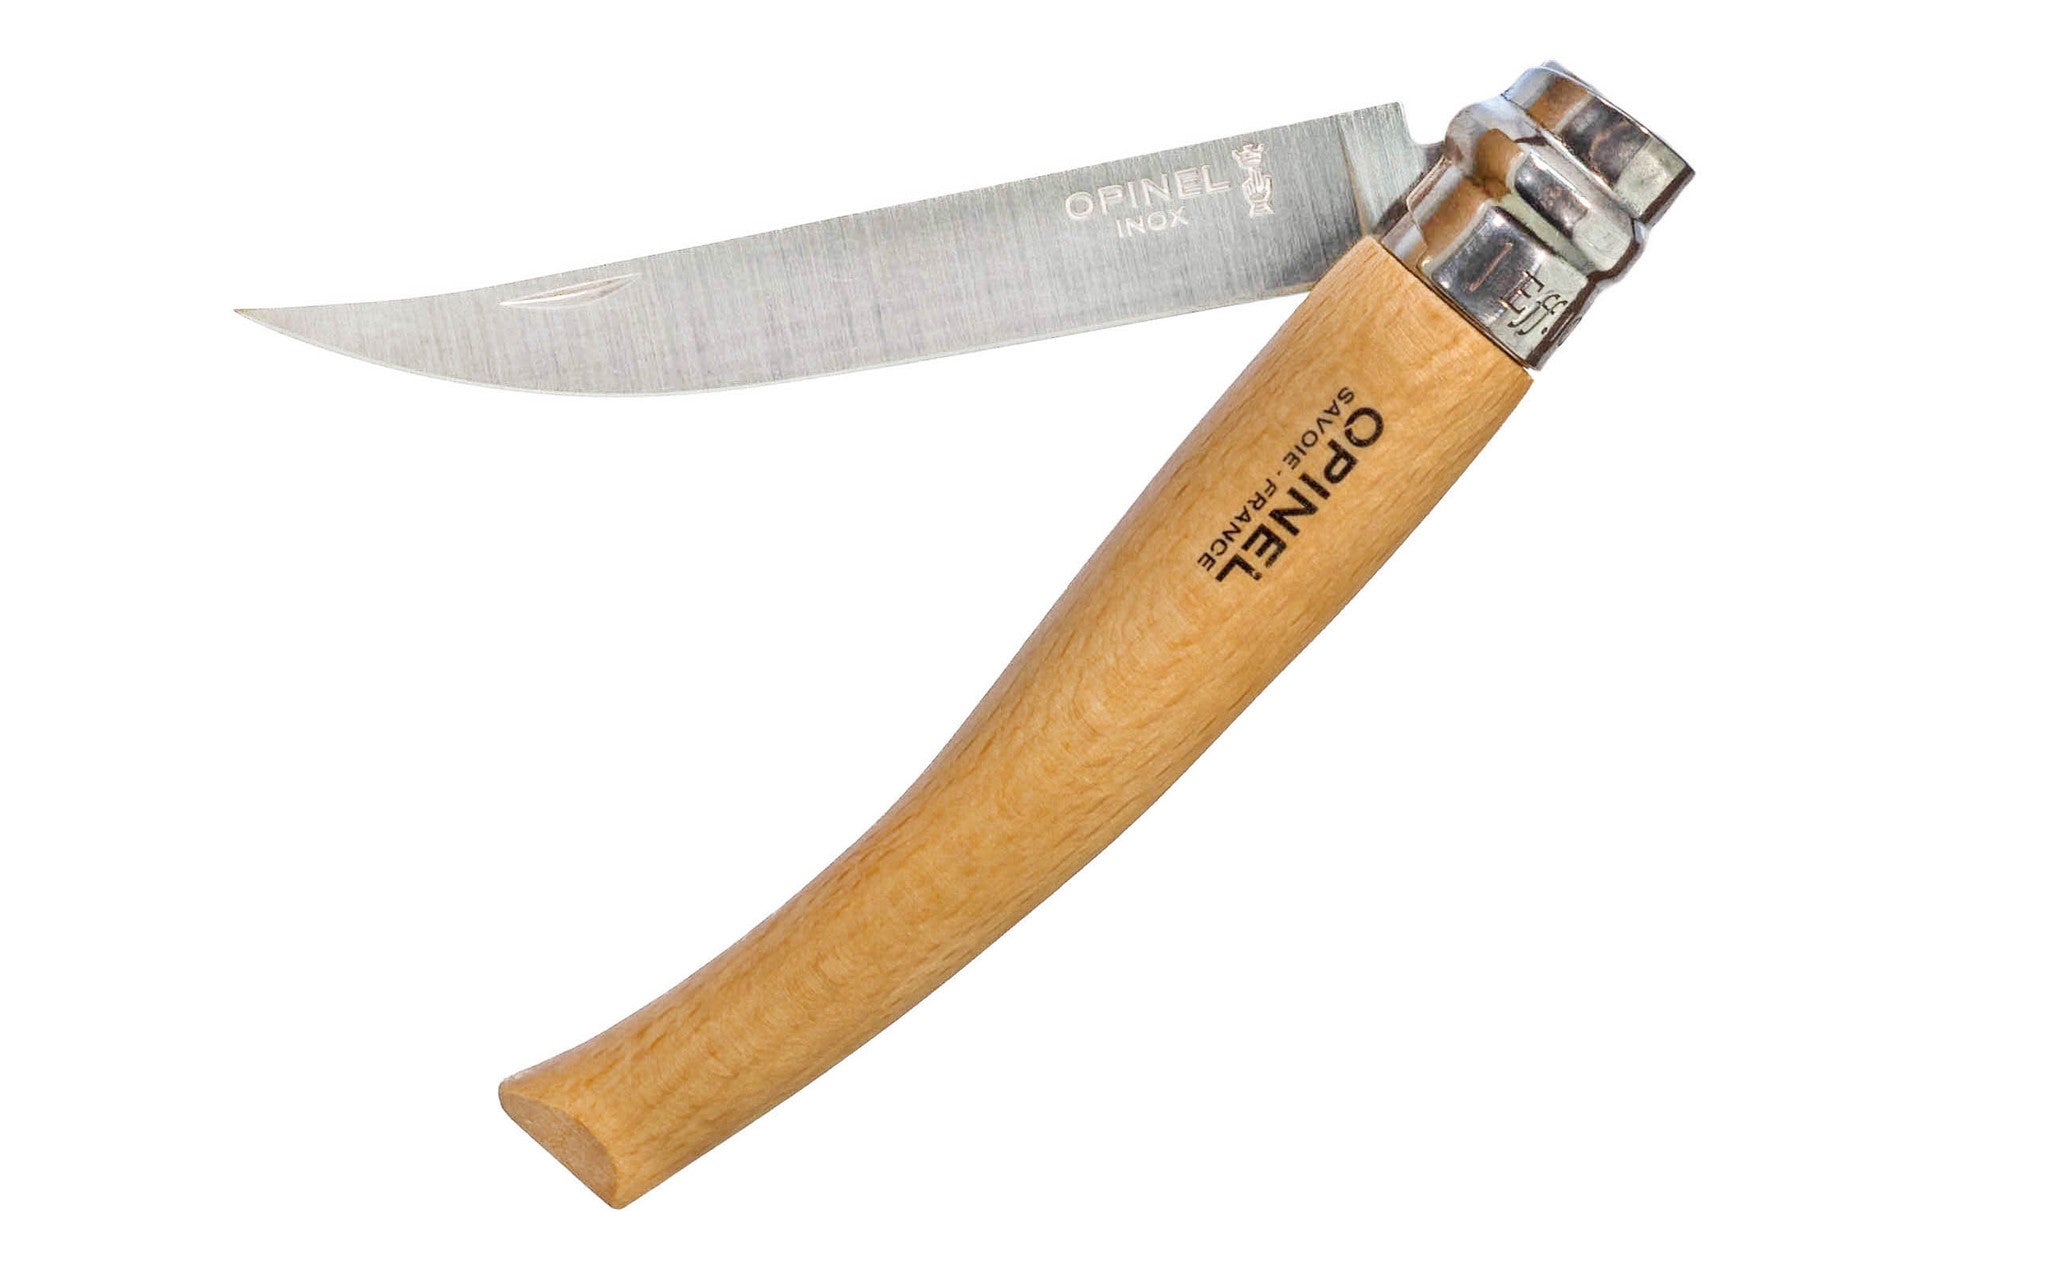 OPINEL NO. 13 KNIFE - STAINLESS STEEL - PURCHASE OF KITCHEN UTENSILS